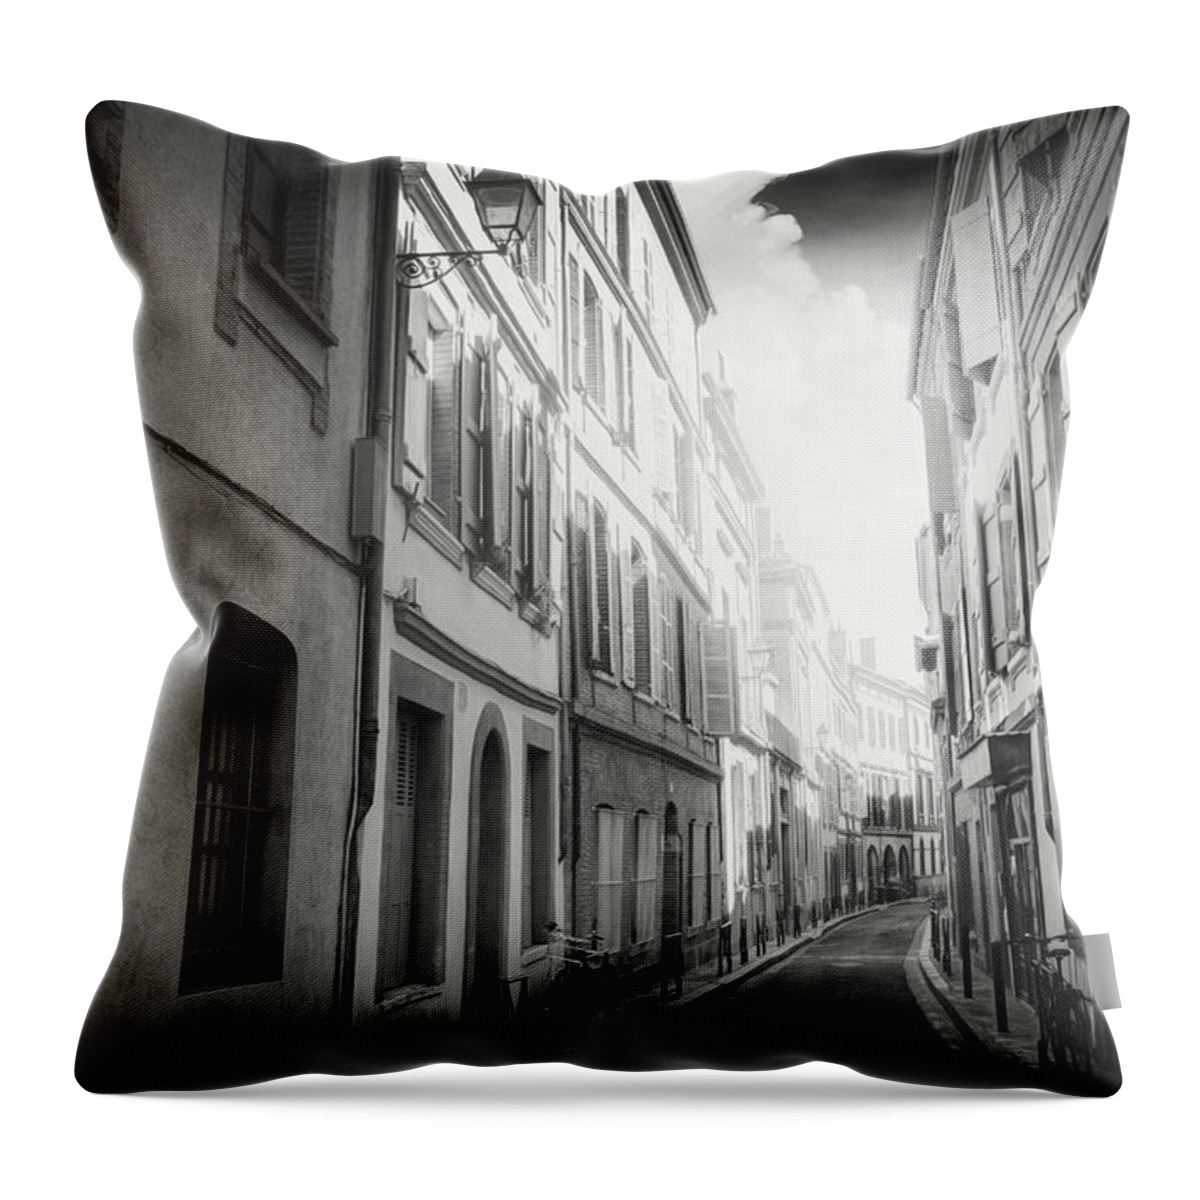 Toulouse Throw Pillow featuring the photograph European Street Scenes Toulouse France Black and White by Carol Japp